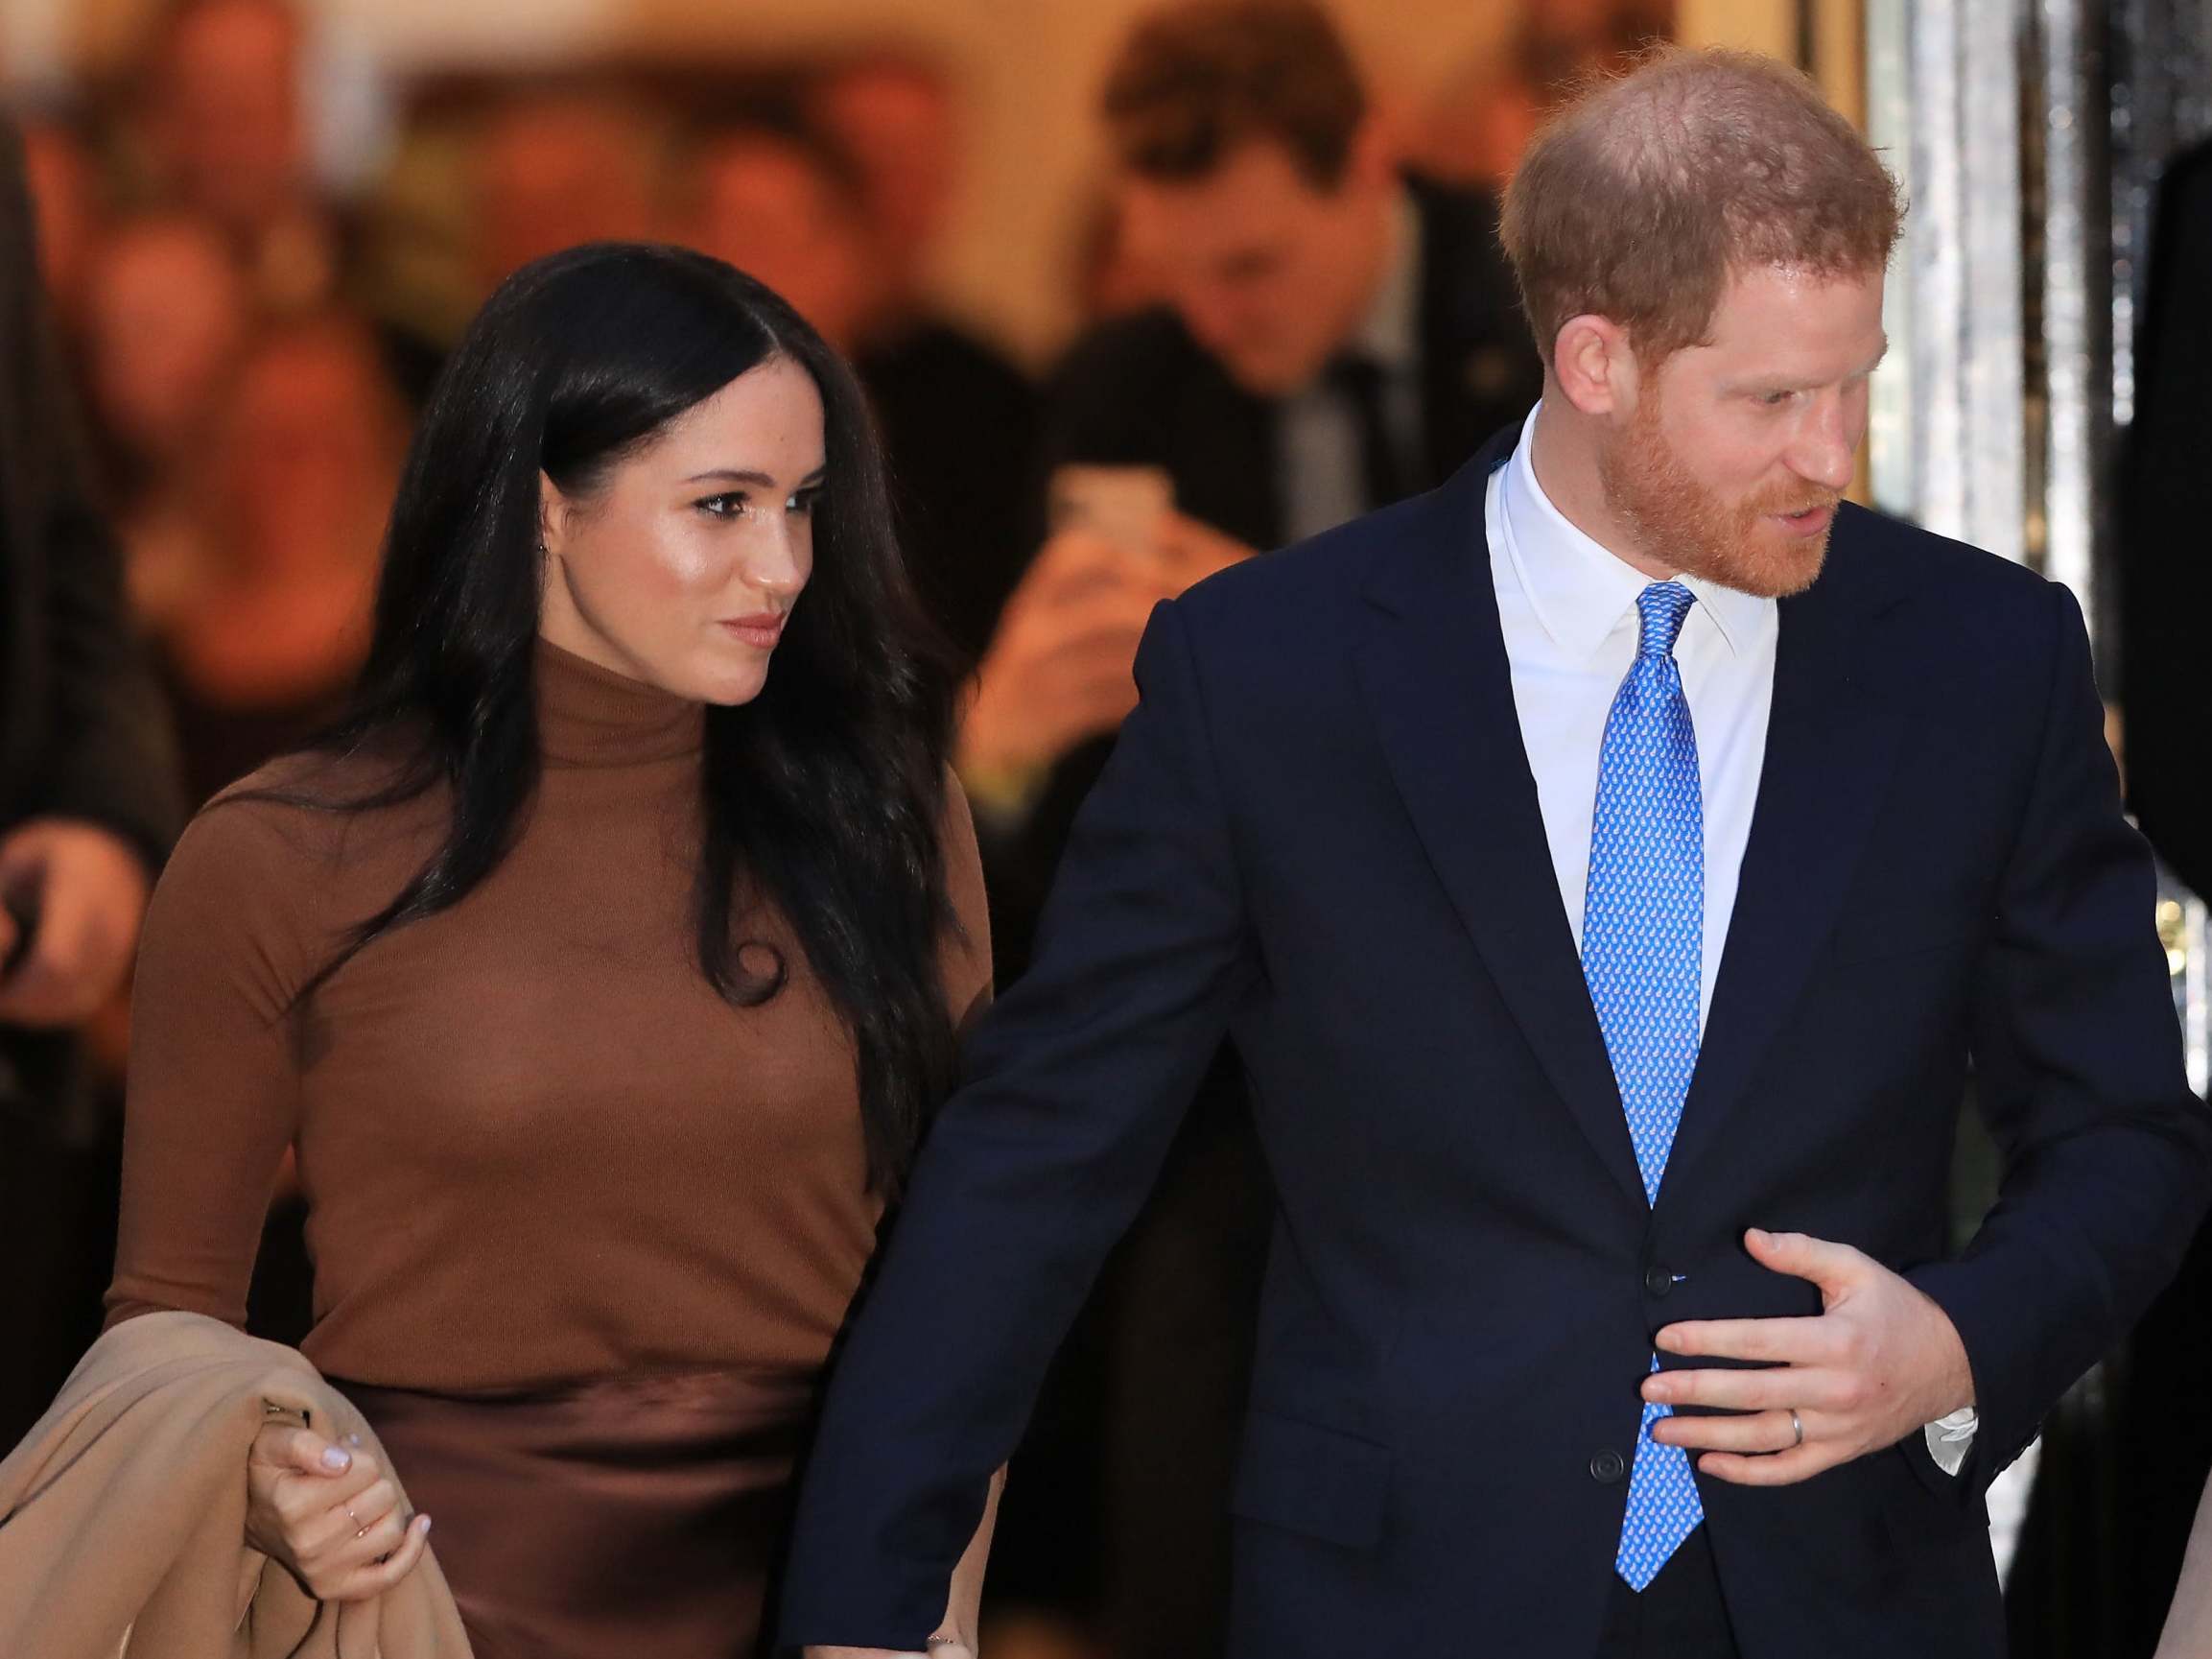 Palace publicly warns Prince Harry and Meghan Markle over plans to quit royal family